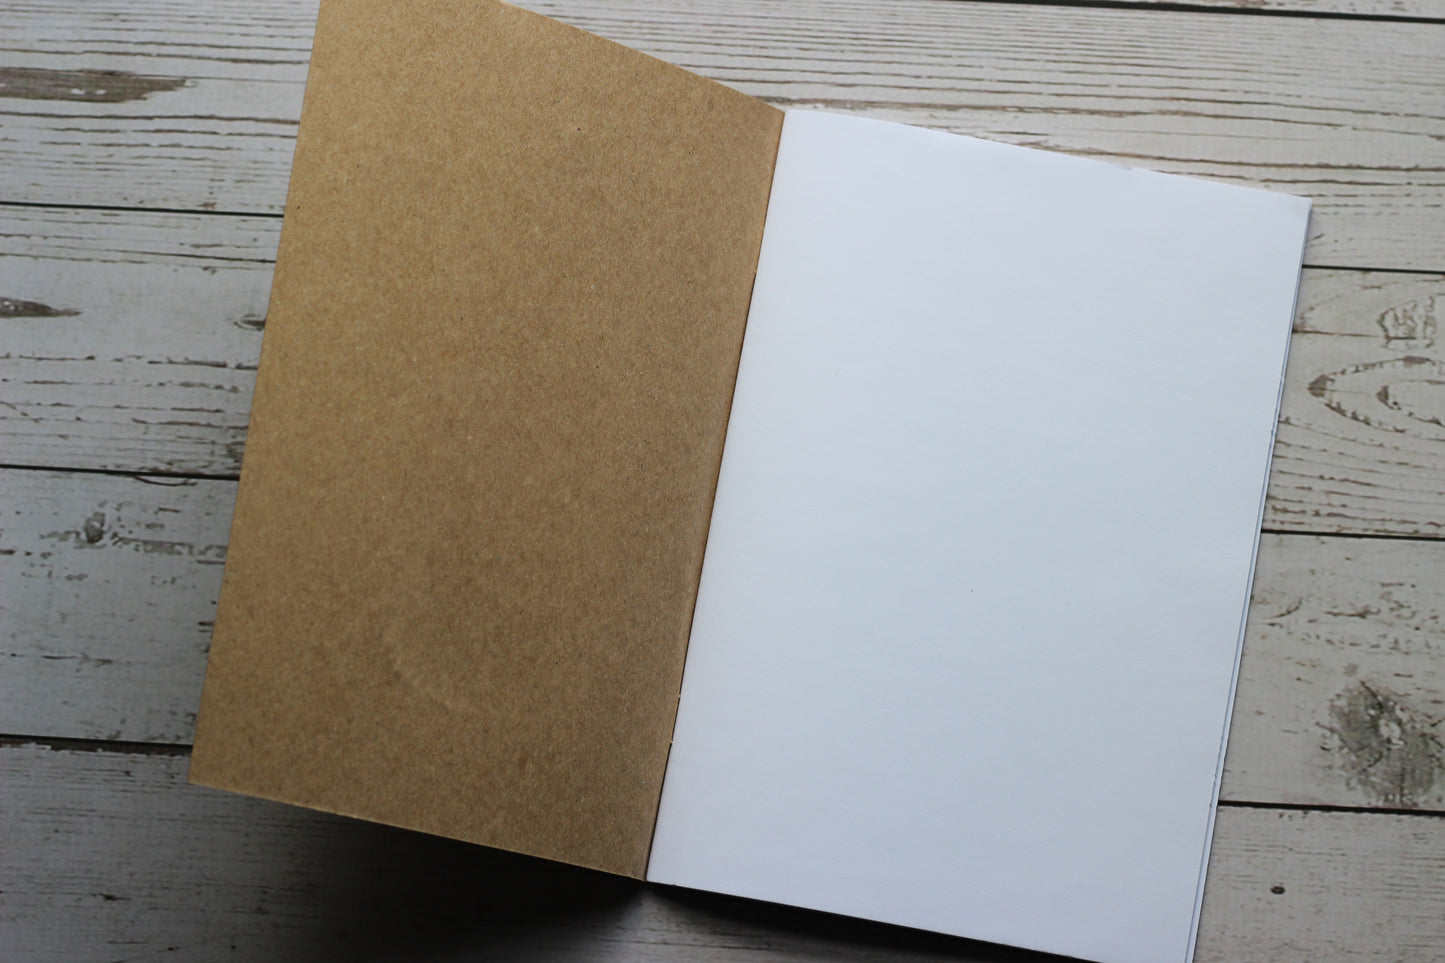 The inside of the sketchbook showing blank pages